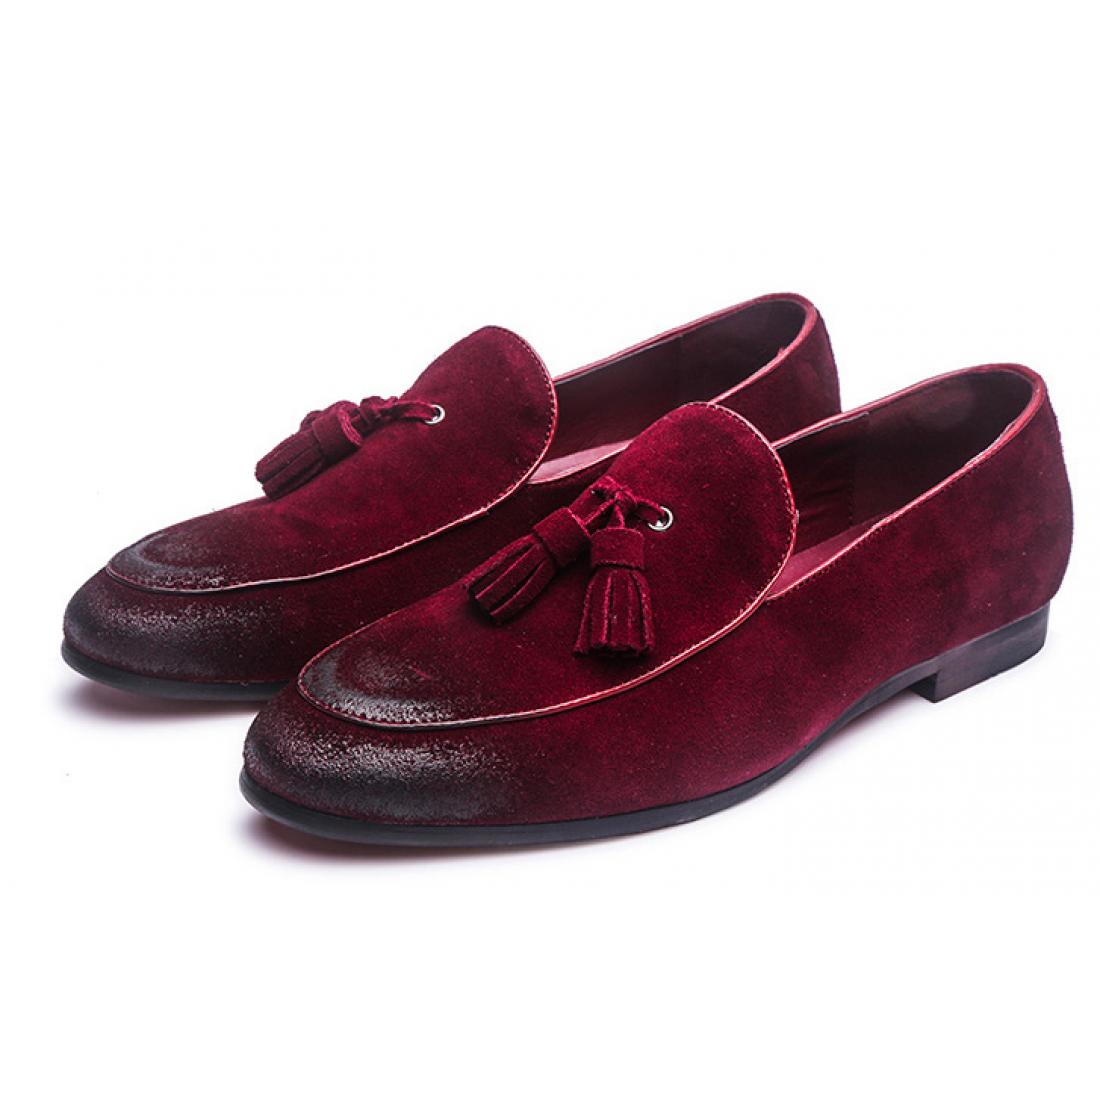 Burgundy Suede Tassels Mens Business Prom Loafers Dress Shoes ...